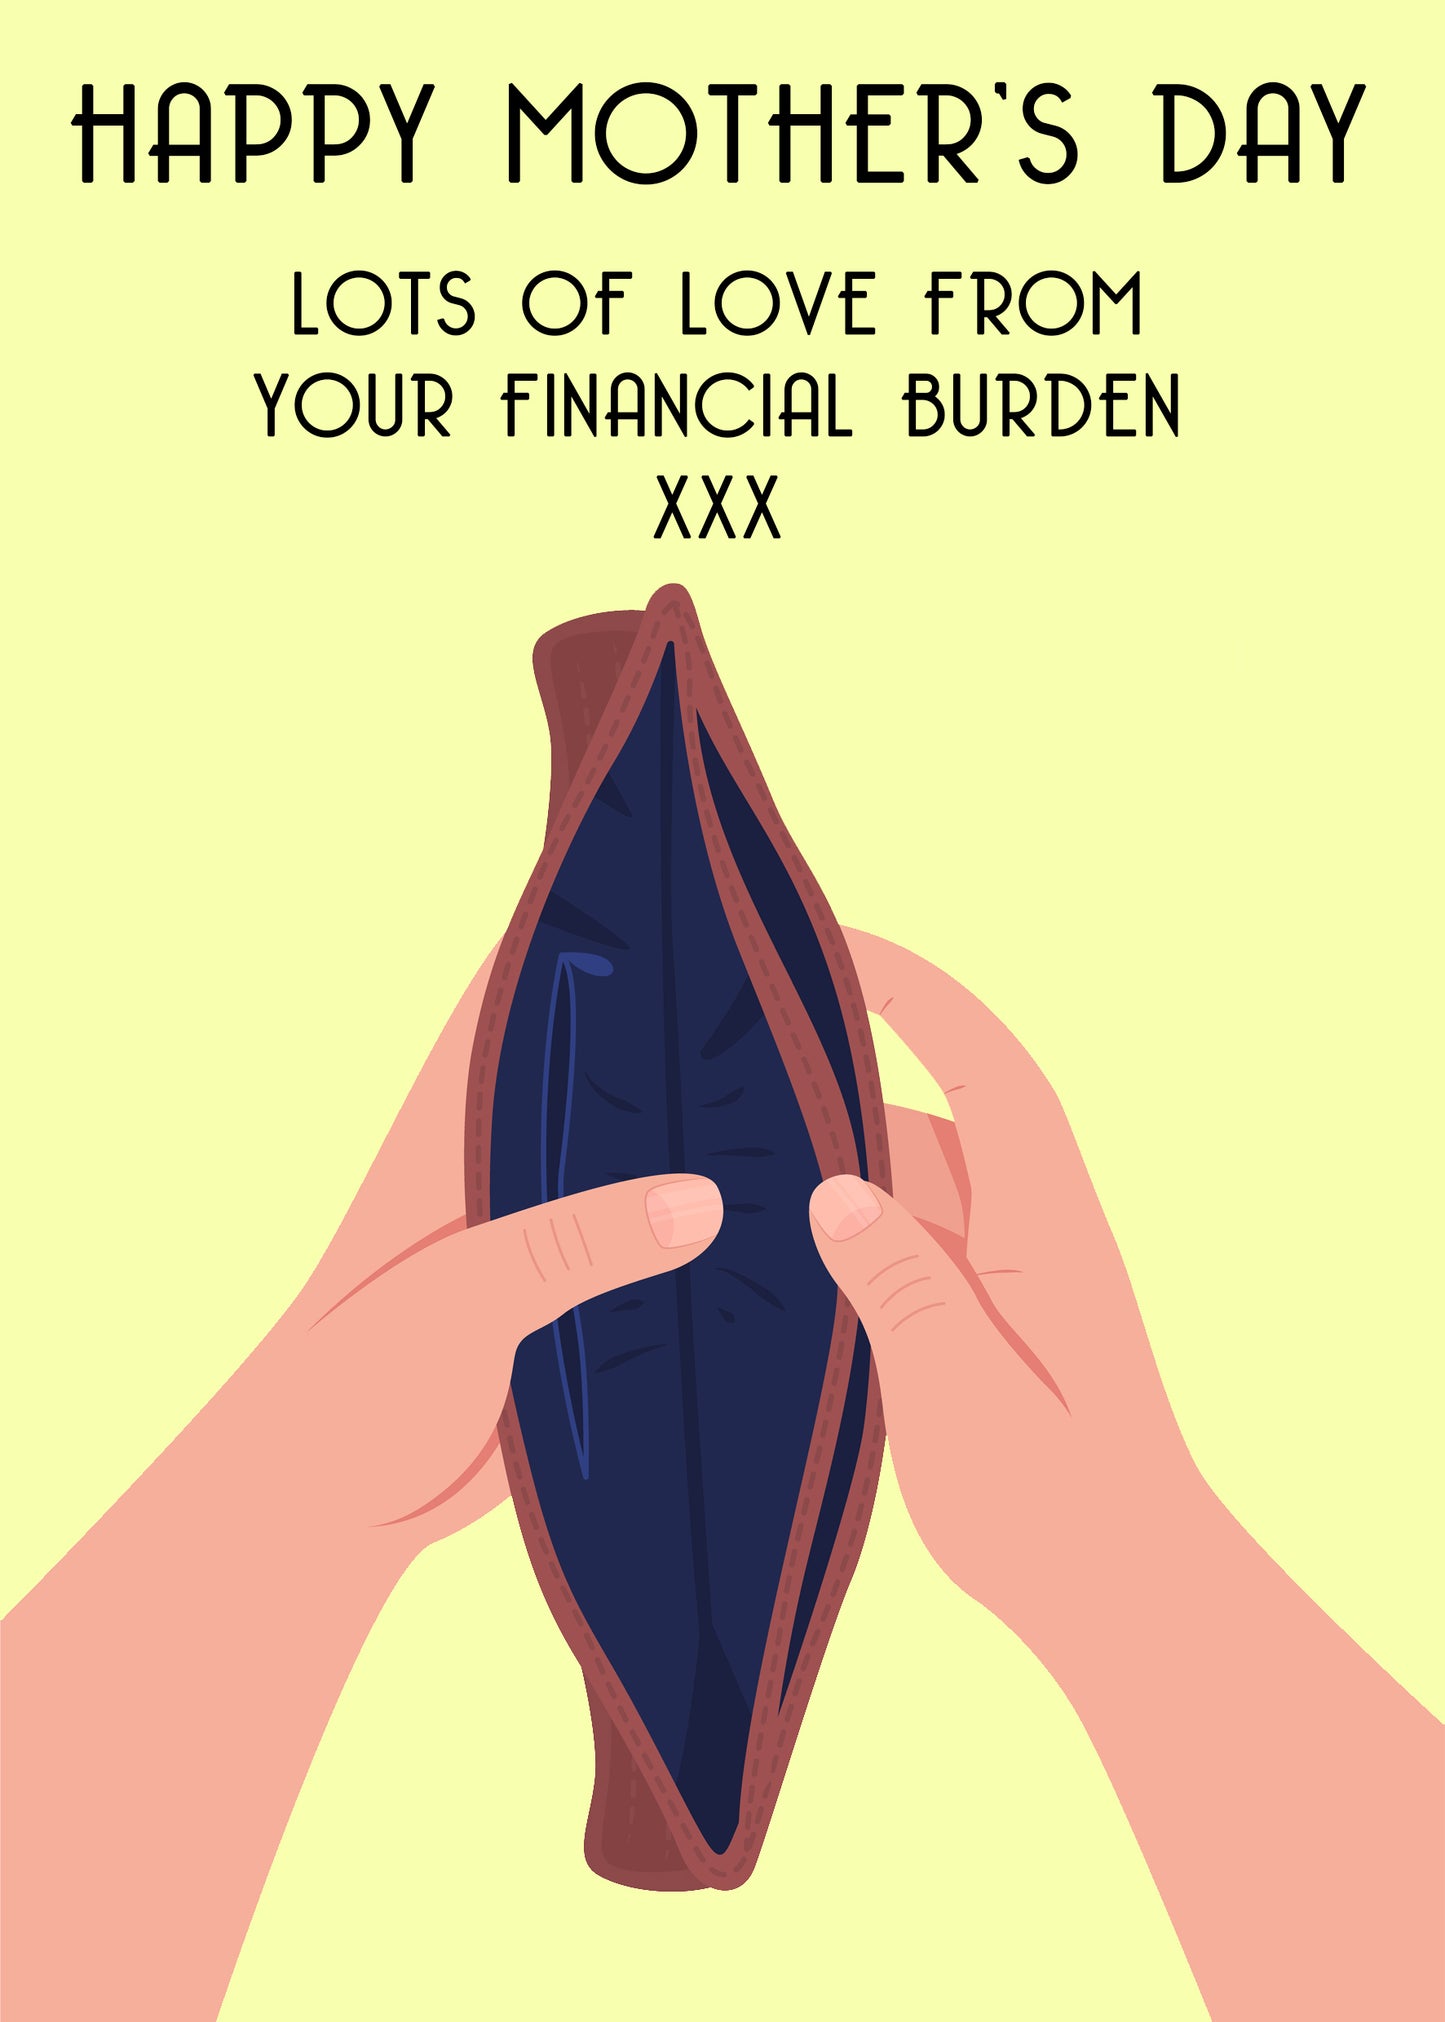 Financial Burden Funny Mother's Day Cards